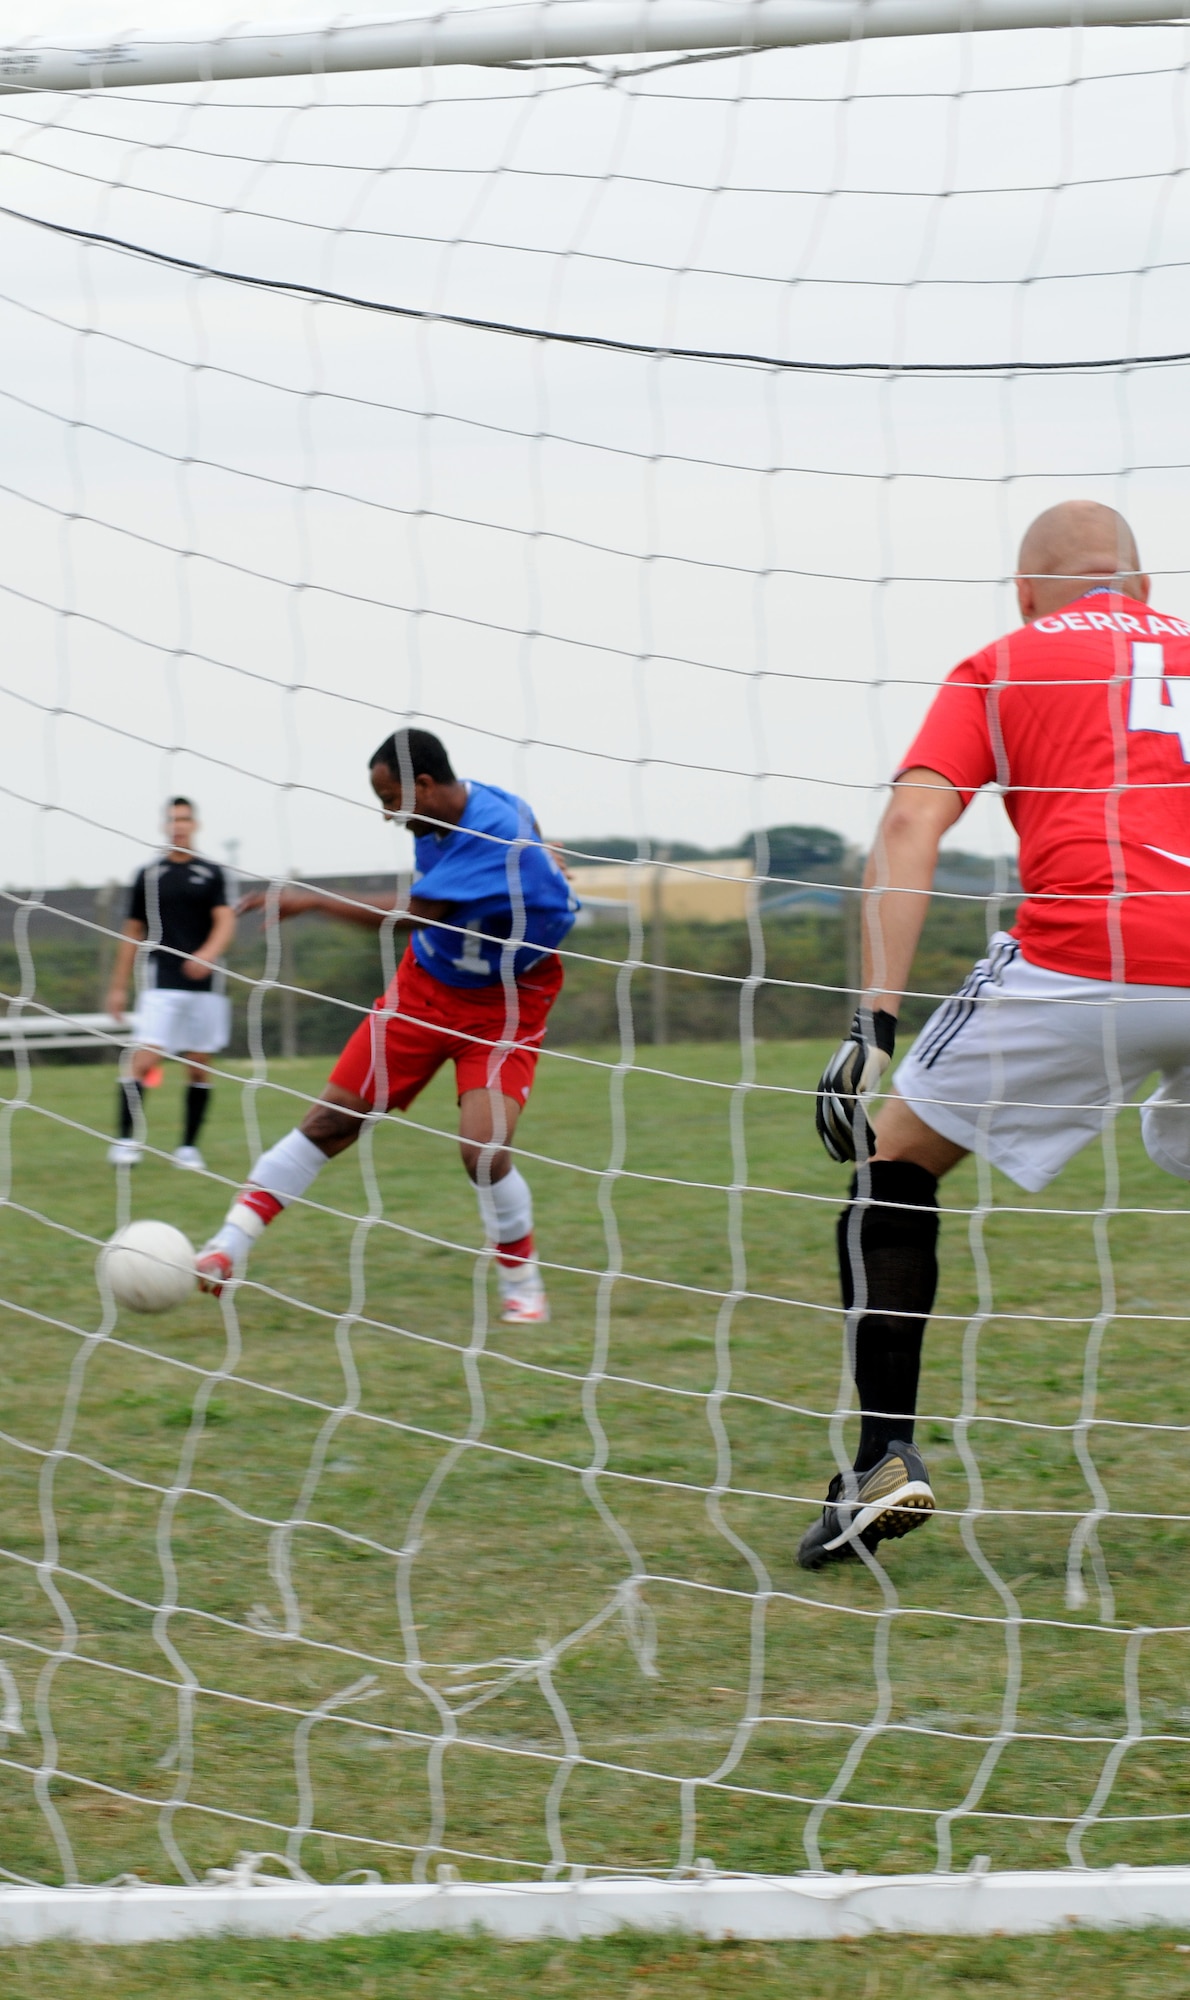 RAF MILDENHALL, England -- Striker Kibrom Retta, 100th Logistics Readiness Squadron, takes a shot against keeper Pete Webb, 727th Air Mobility Squadron, during the first day of play of the Mildenhall Intramural Outdoor Soccer season Aug. 24 at the southside soccer fields. Retta scored two of 100 LRS' four scores to punish the 727th AMS, who laid goose eggs. The game was called at halftime due to 727th AMS' lack of players. Anyone interested in the league should contact the Northside Fitness Center at DSN 238-2349. (U.S. Air Force photo by Senior Airman Thomas Trower)